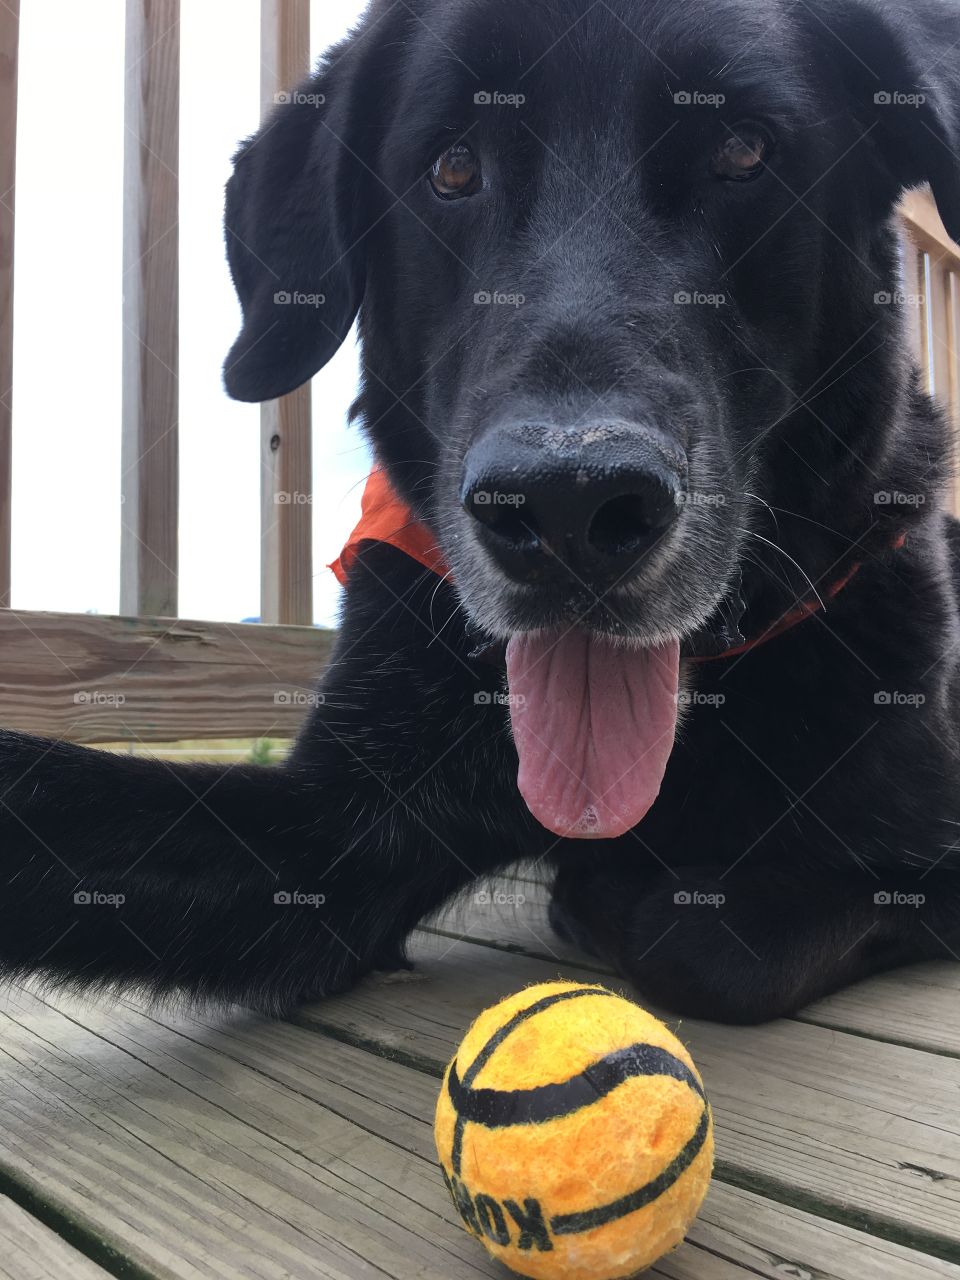 A boy and his ball